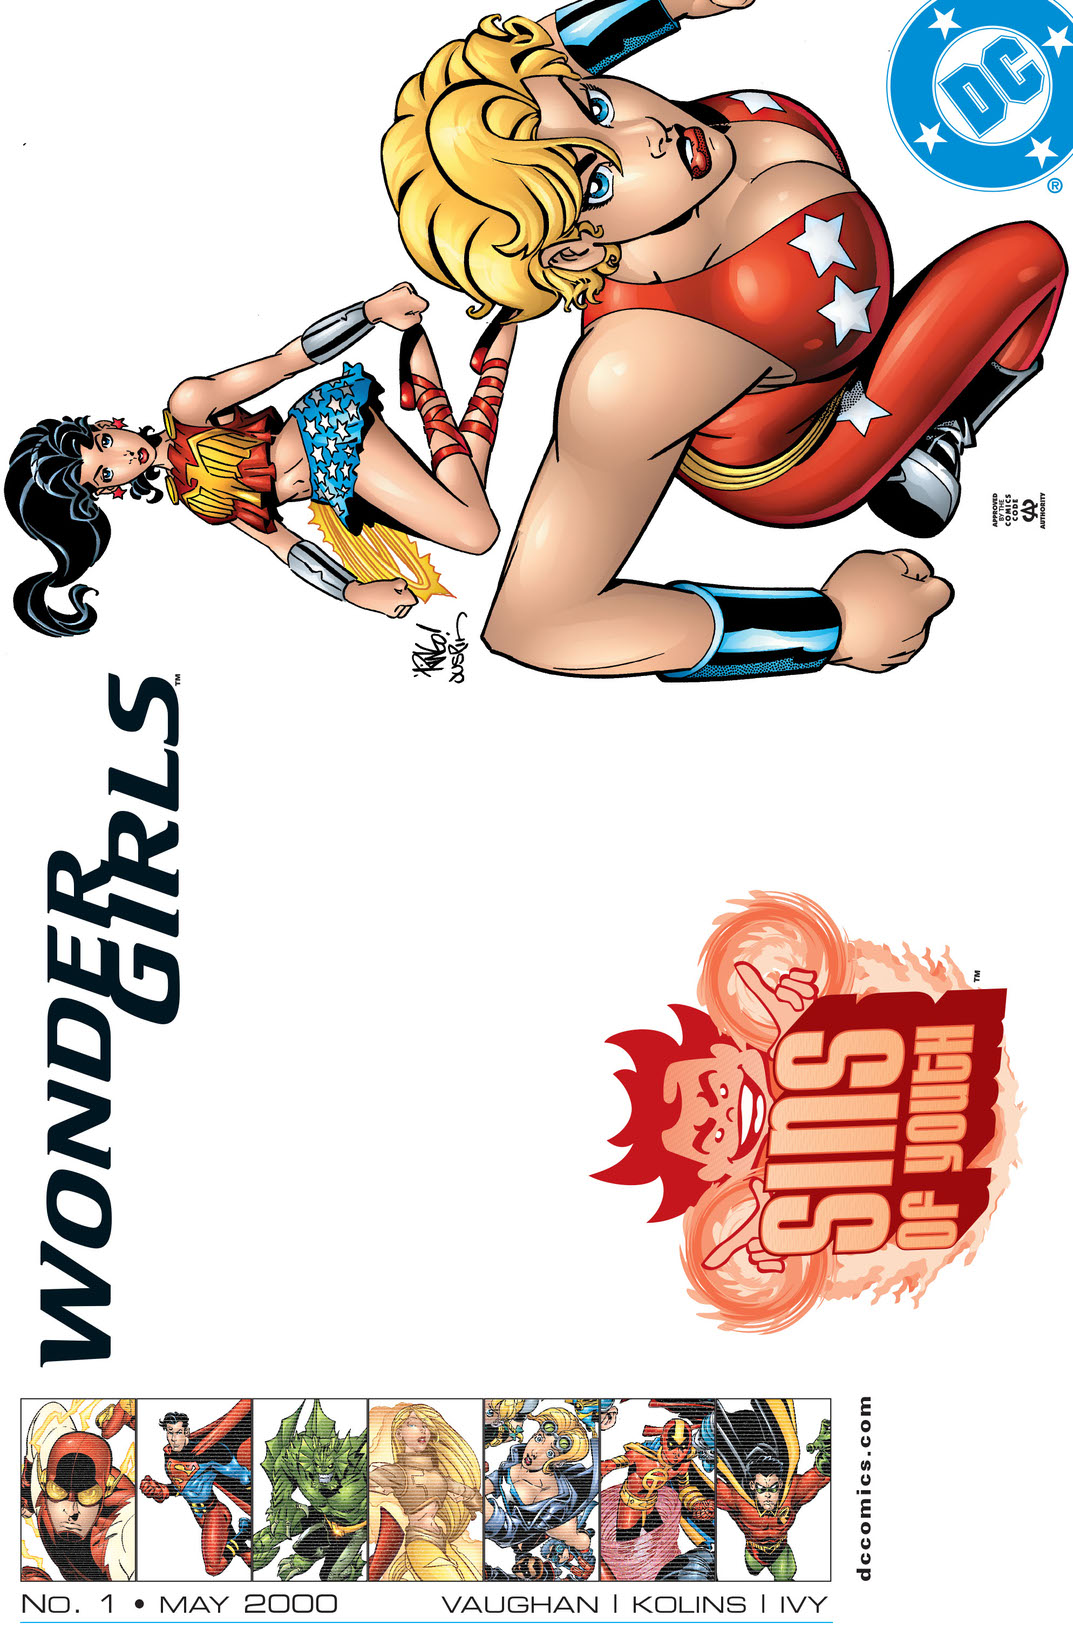 Sins of Youth: Wonder Girls #1 preview images